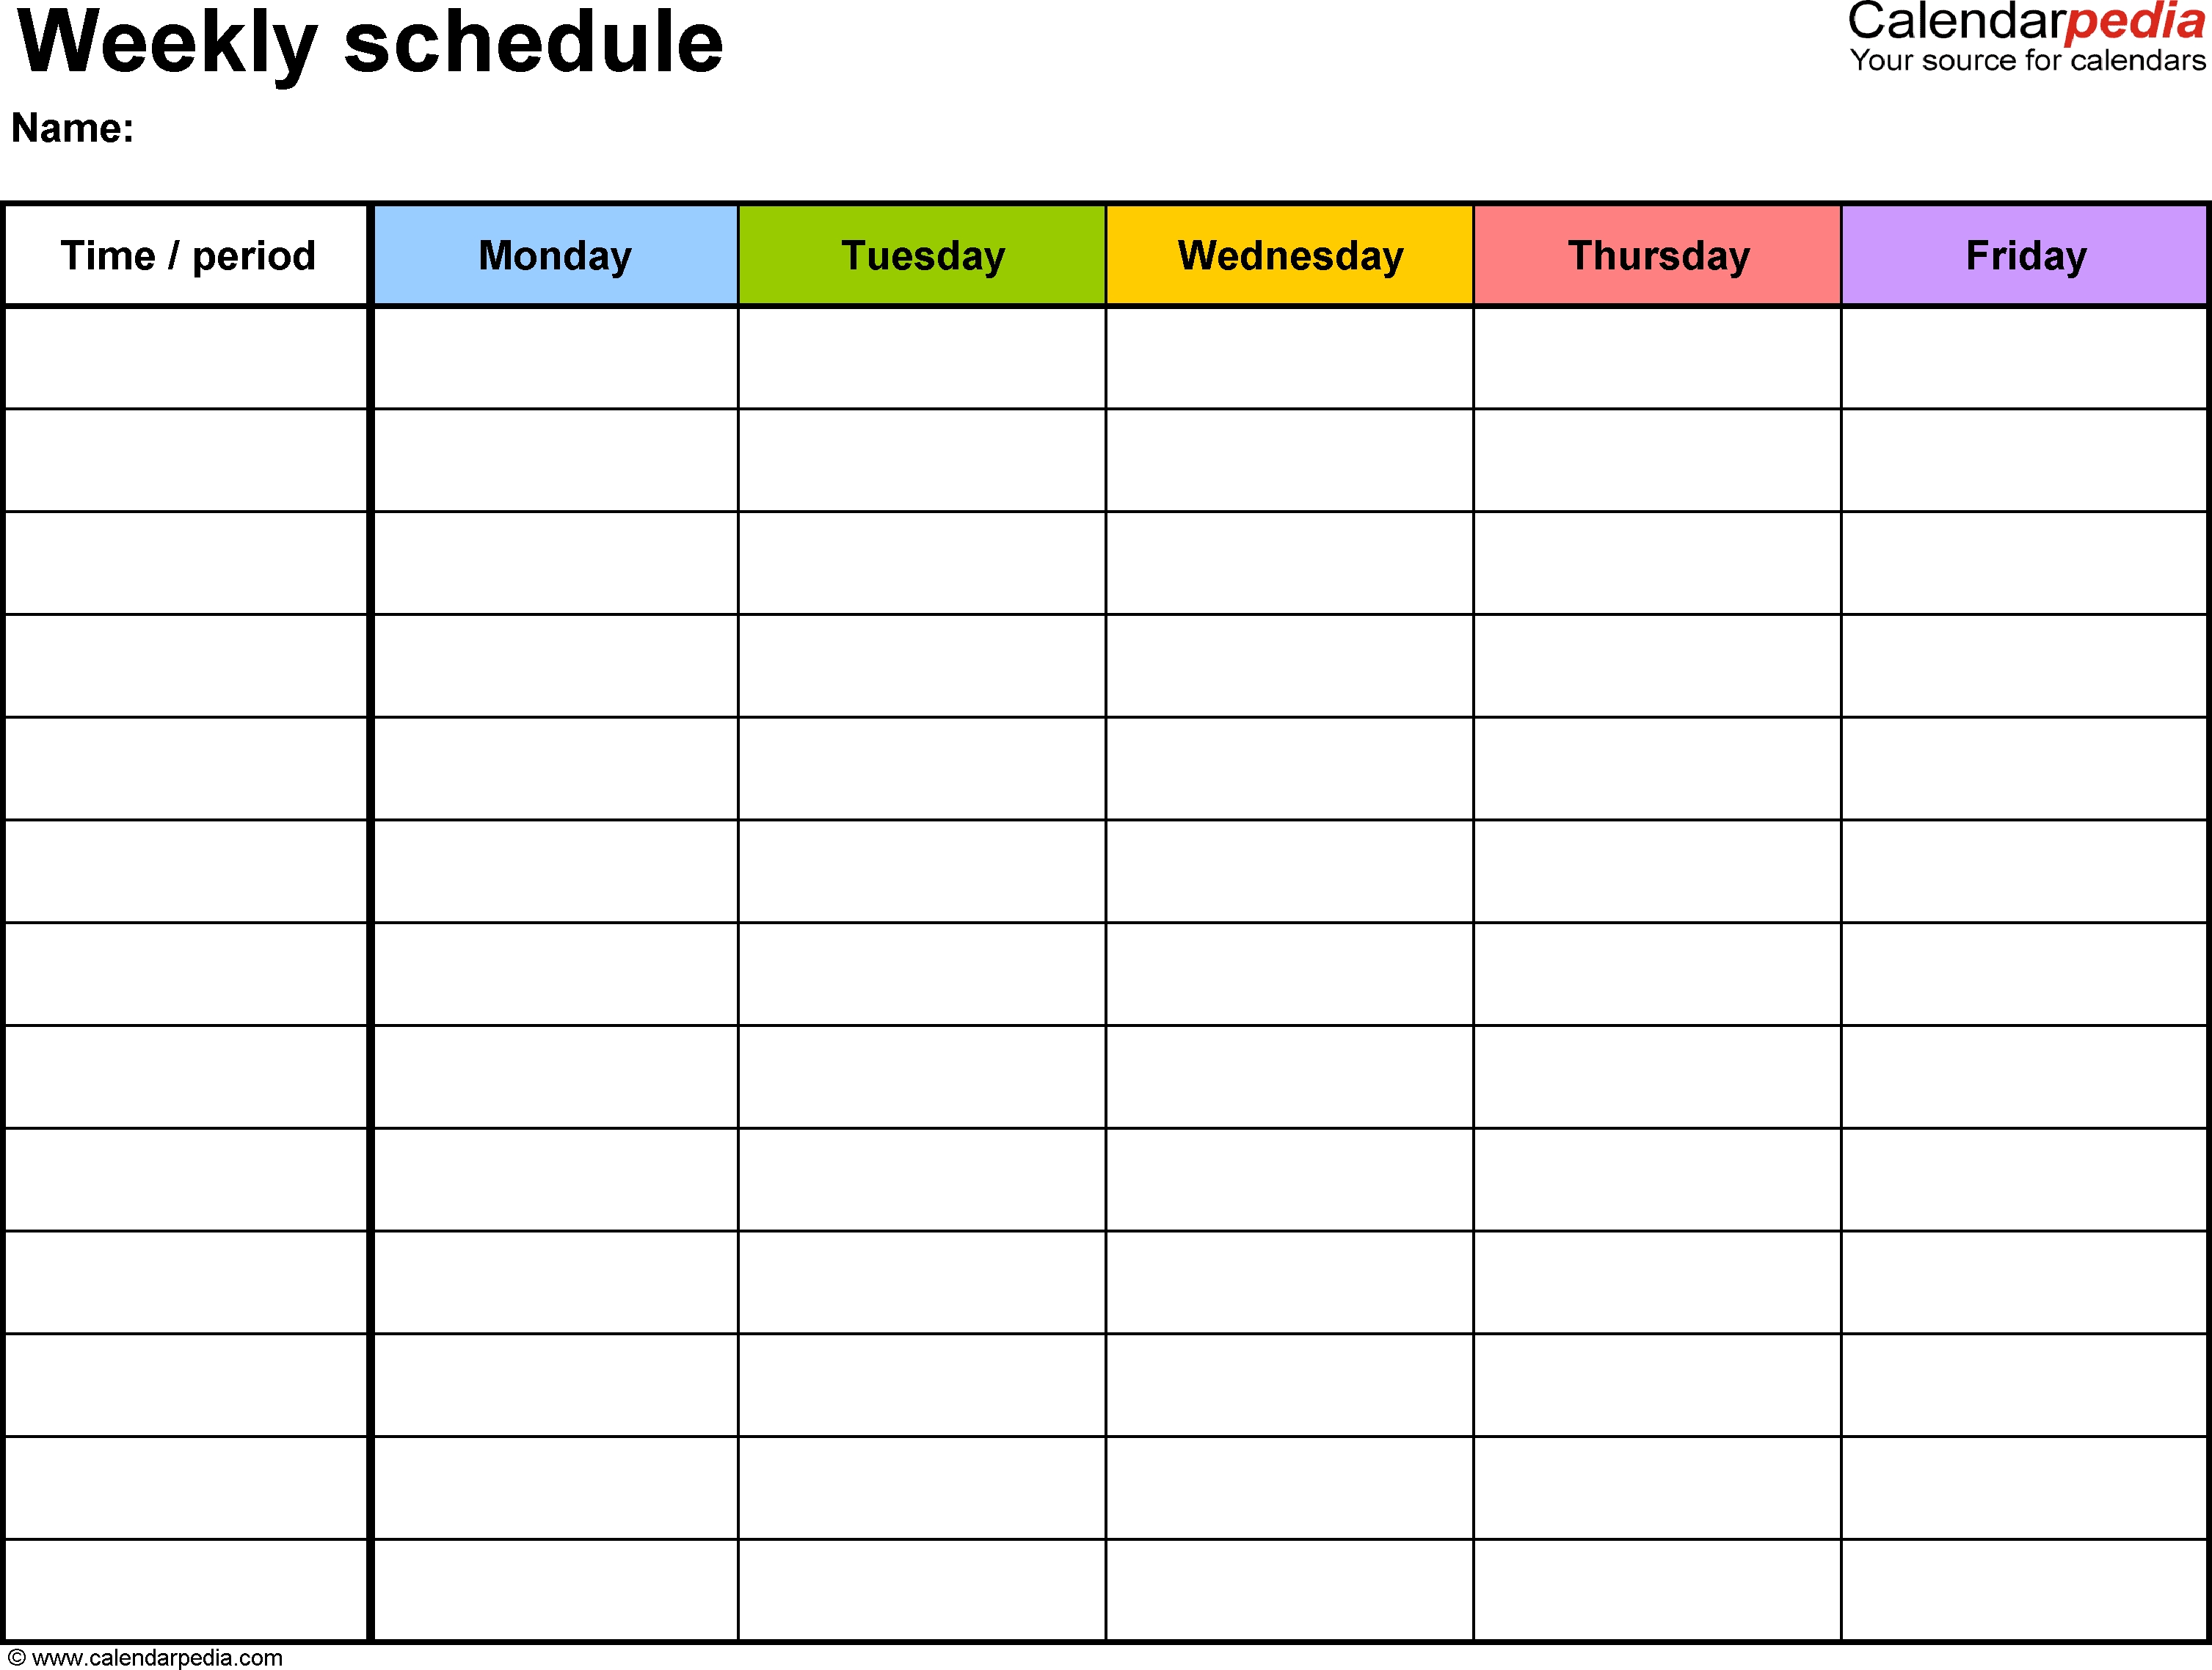 Free Weekly Schedule Templates For Excel - 18 Templates Download A Calendar Template